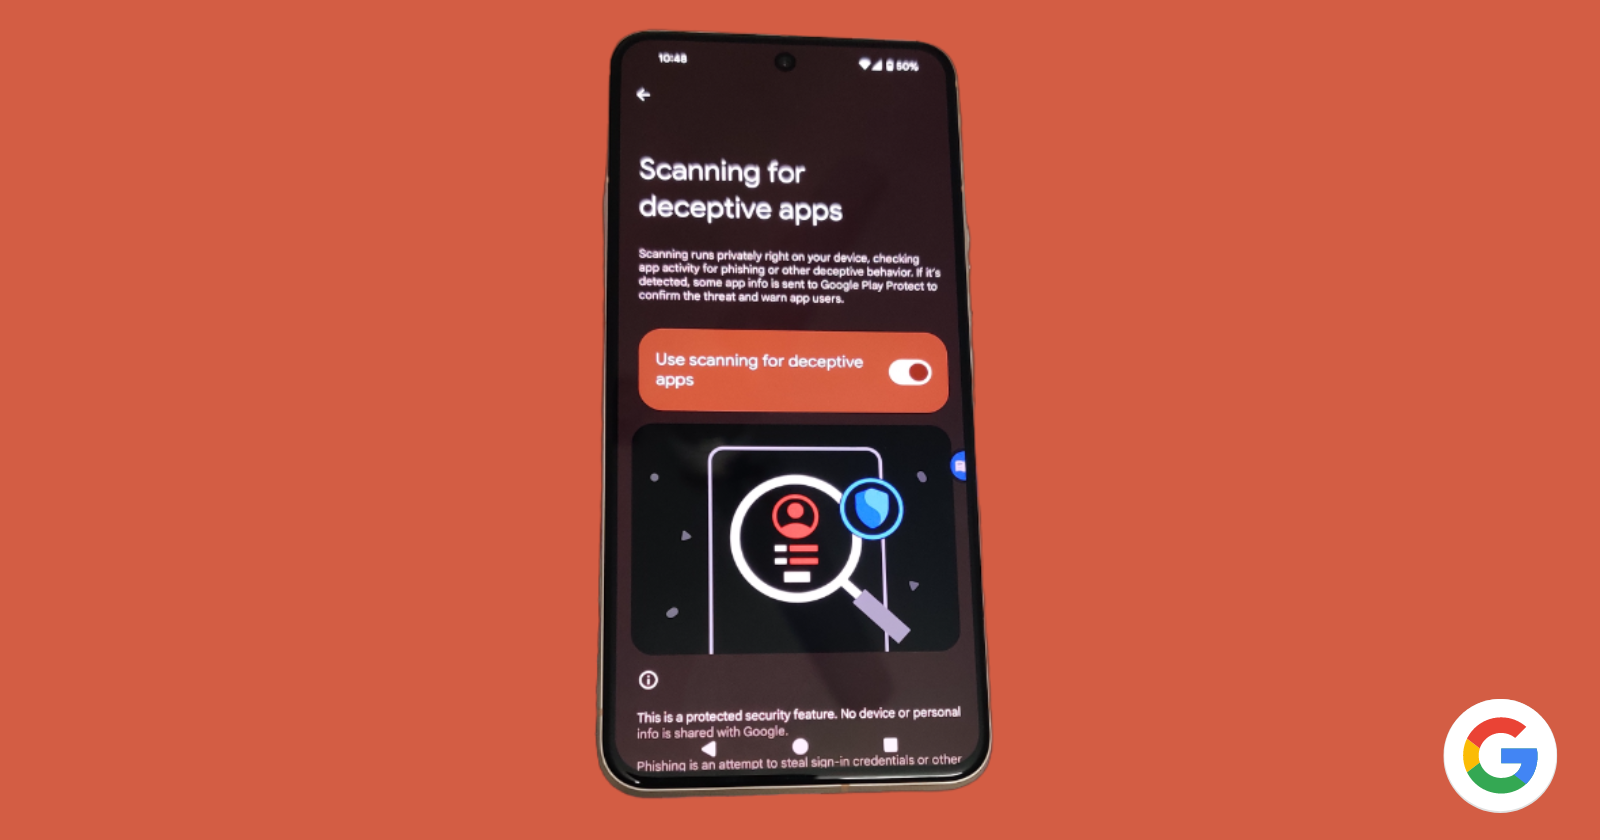 Google has started rolling out 'Scanning for deceptive apps' feature with QPR2 Beta 3.1 release